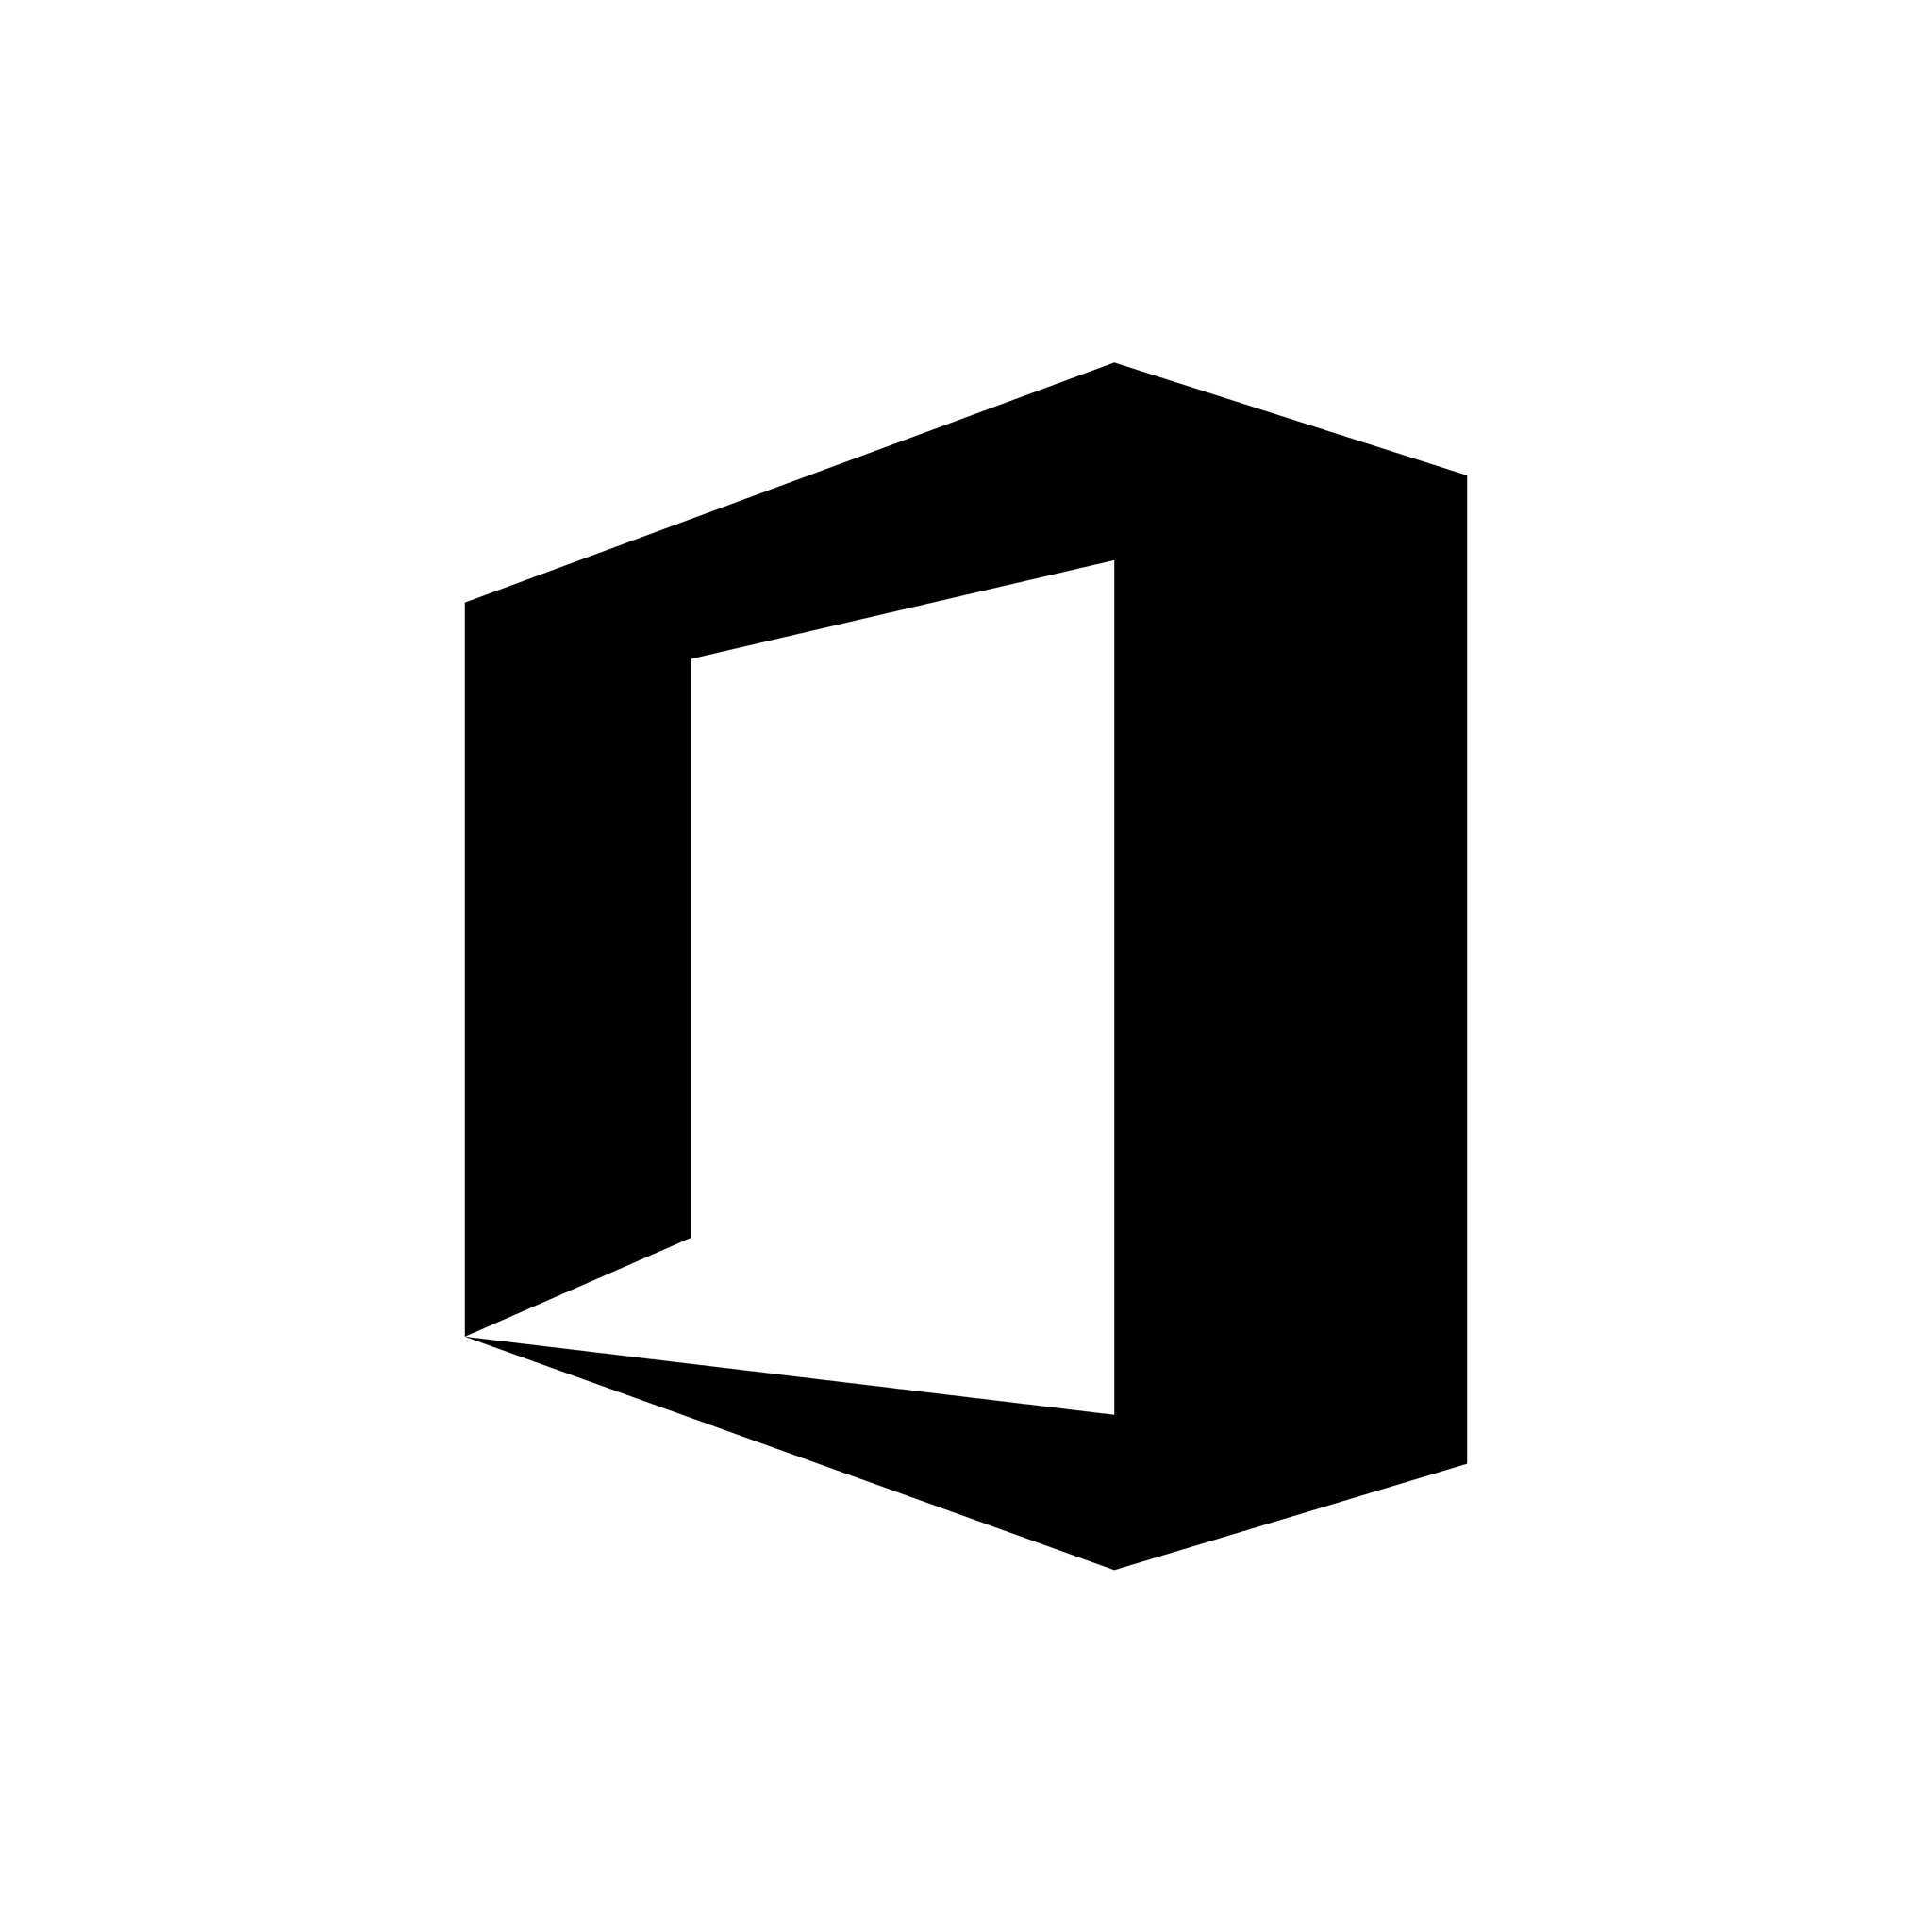 MS Office icon